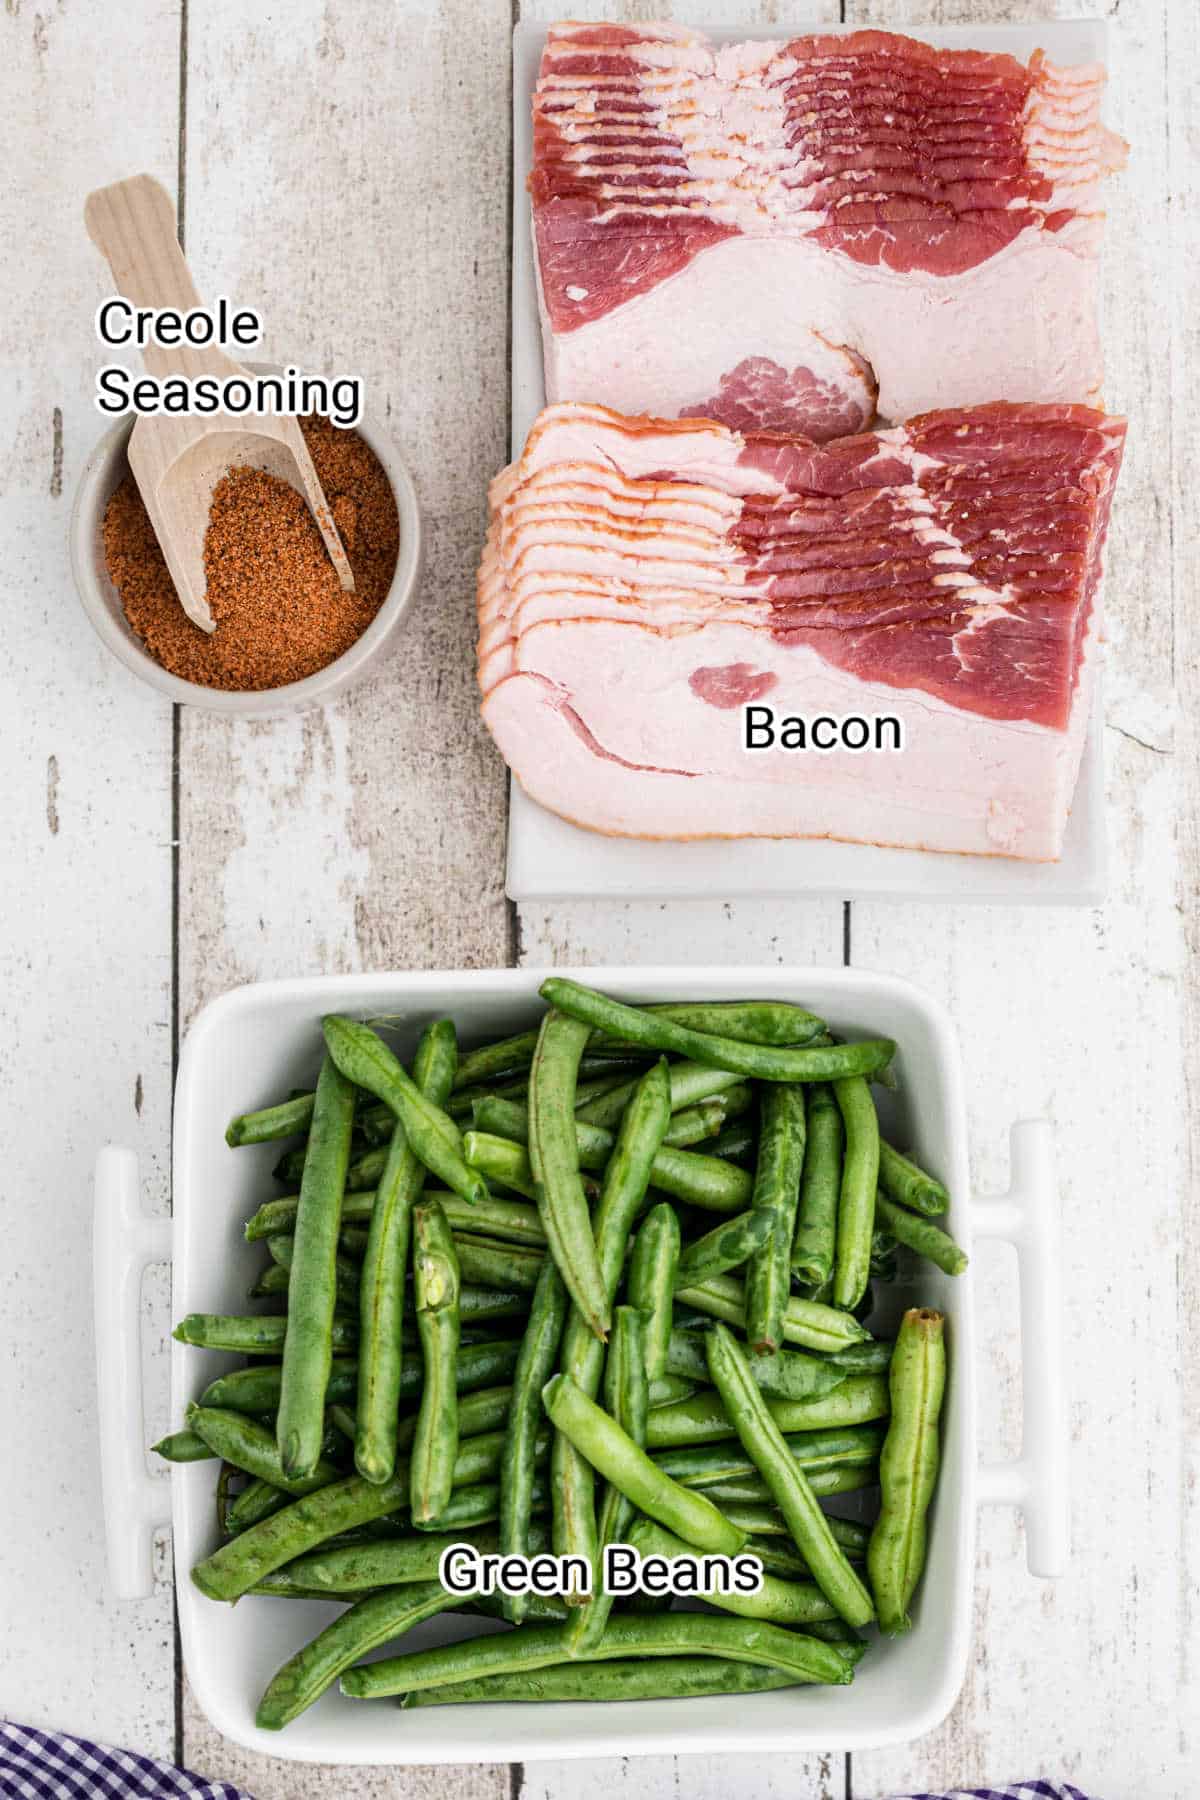 ingredients laid out that go into cajun green beans